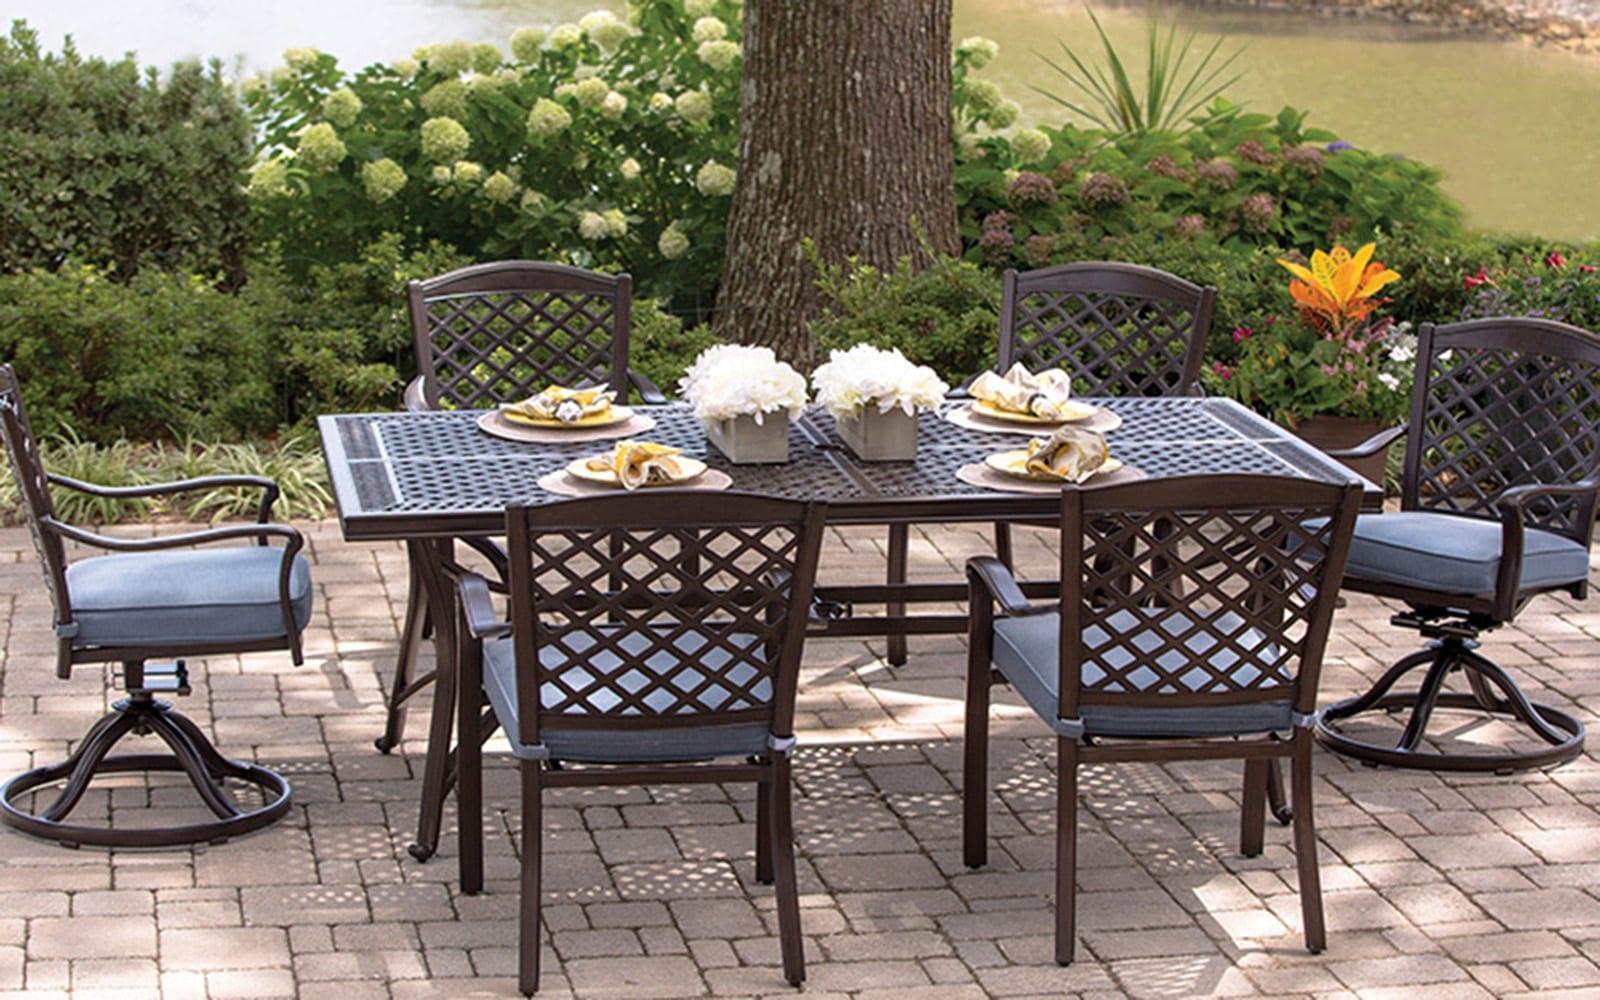 Furniture For Patio - Art Van Outdoor Furniture for Perfect Patio ...